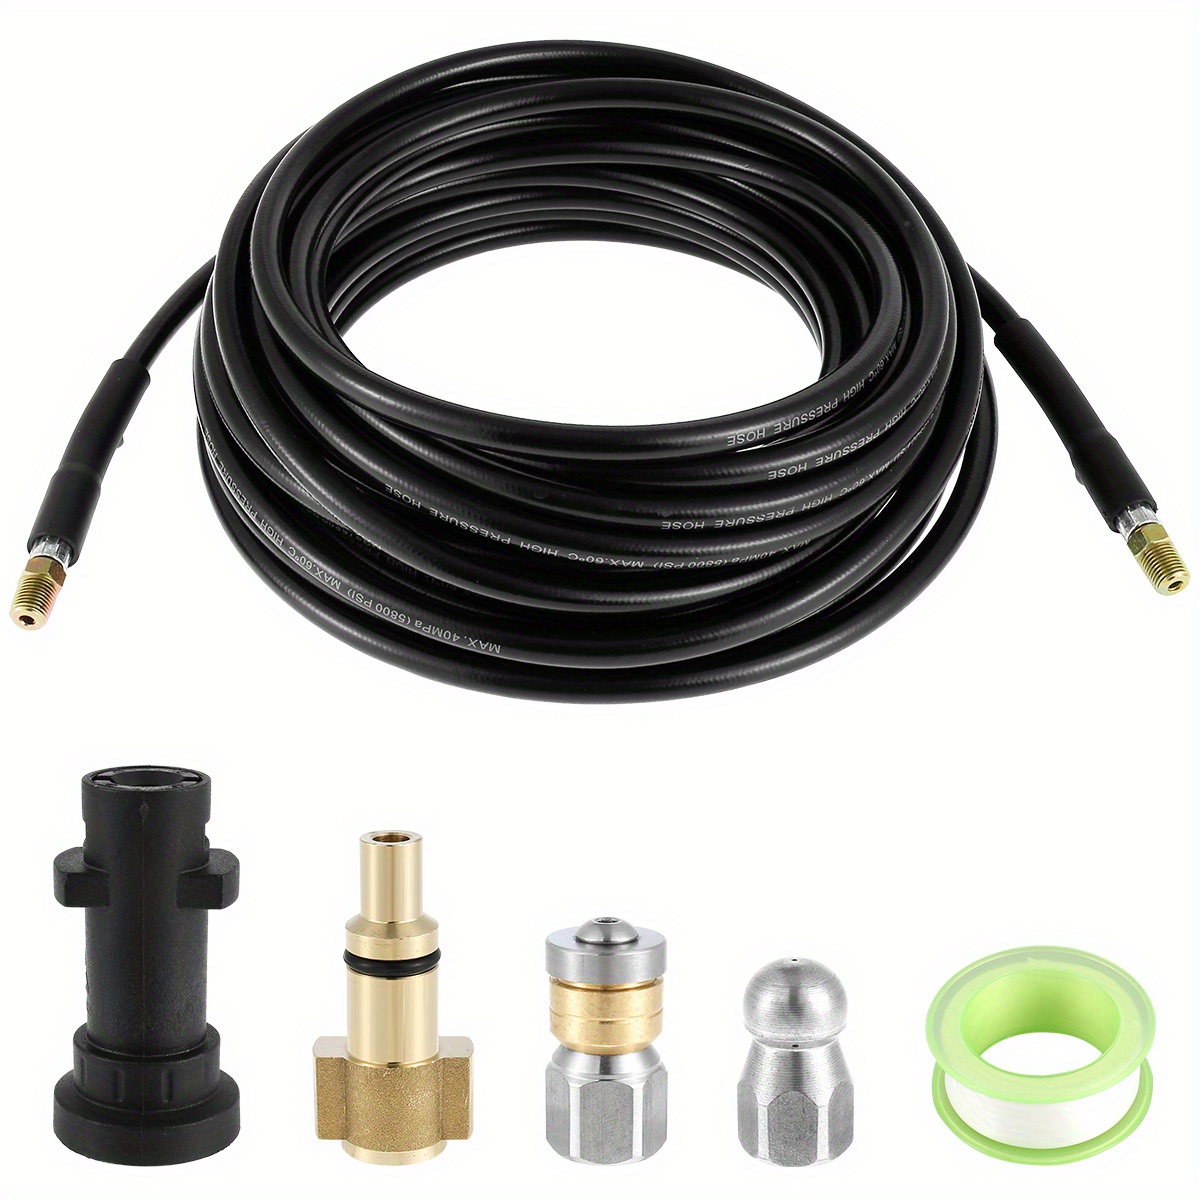 

1set Sewer Jetter Kit 33/50ft High Pressure Washer Drain Cleaning Hose Kit 1/4 Inches Sewer Jetter Nozzle Kit Pipes Gutters Cleaning Tool Compatible With K2 - K7 Series Pressure Washer